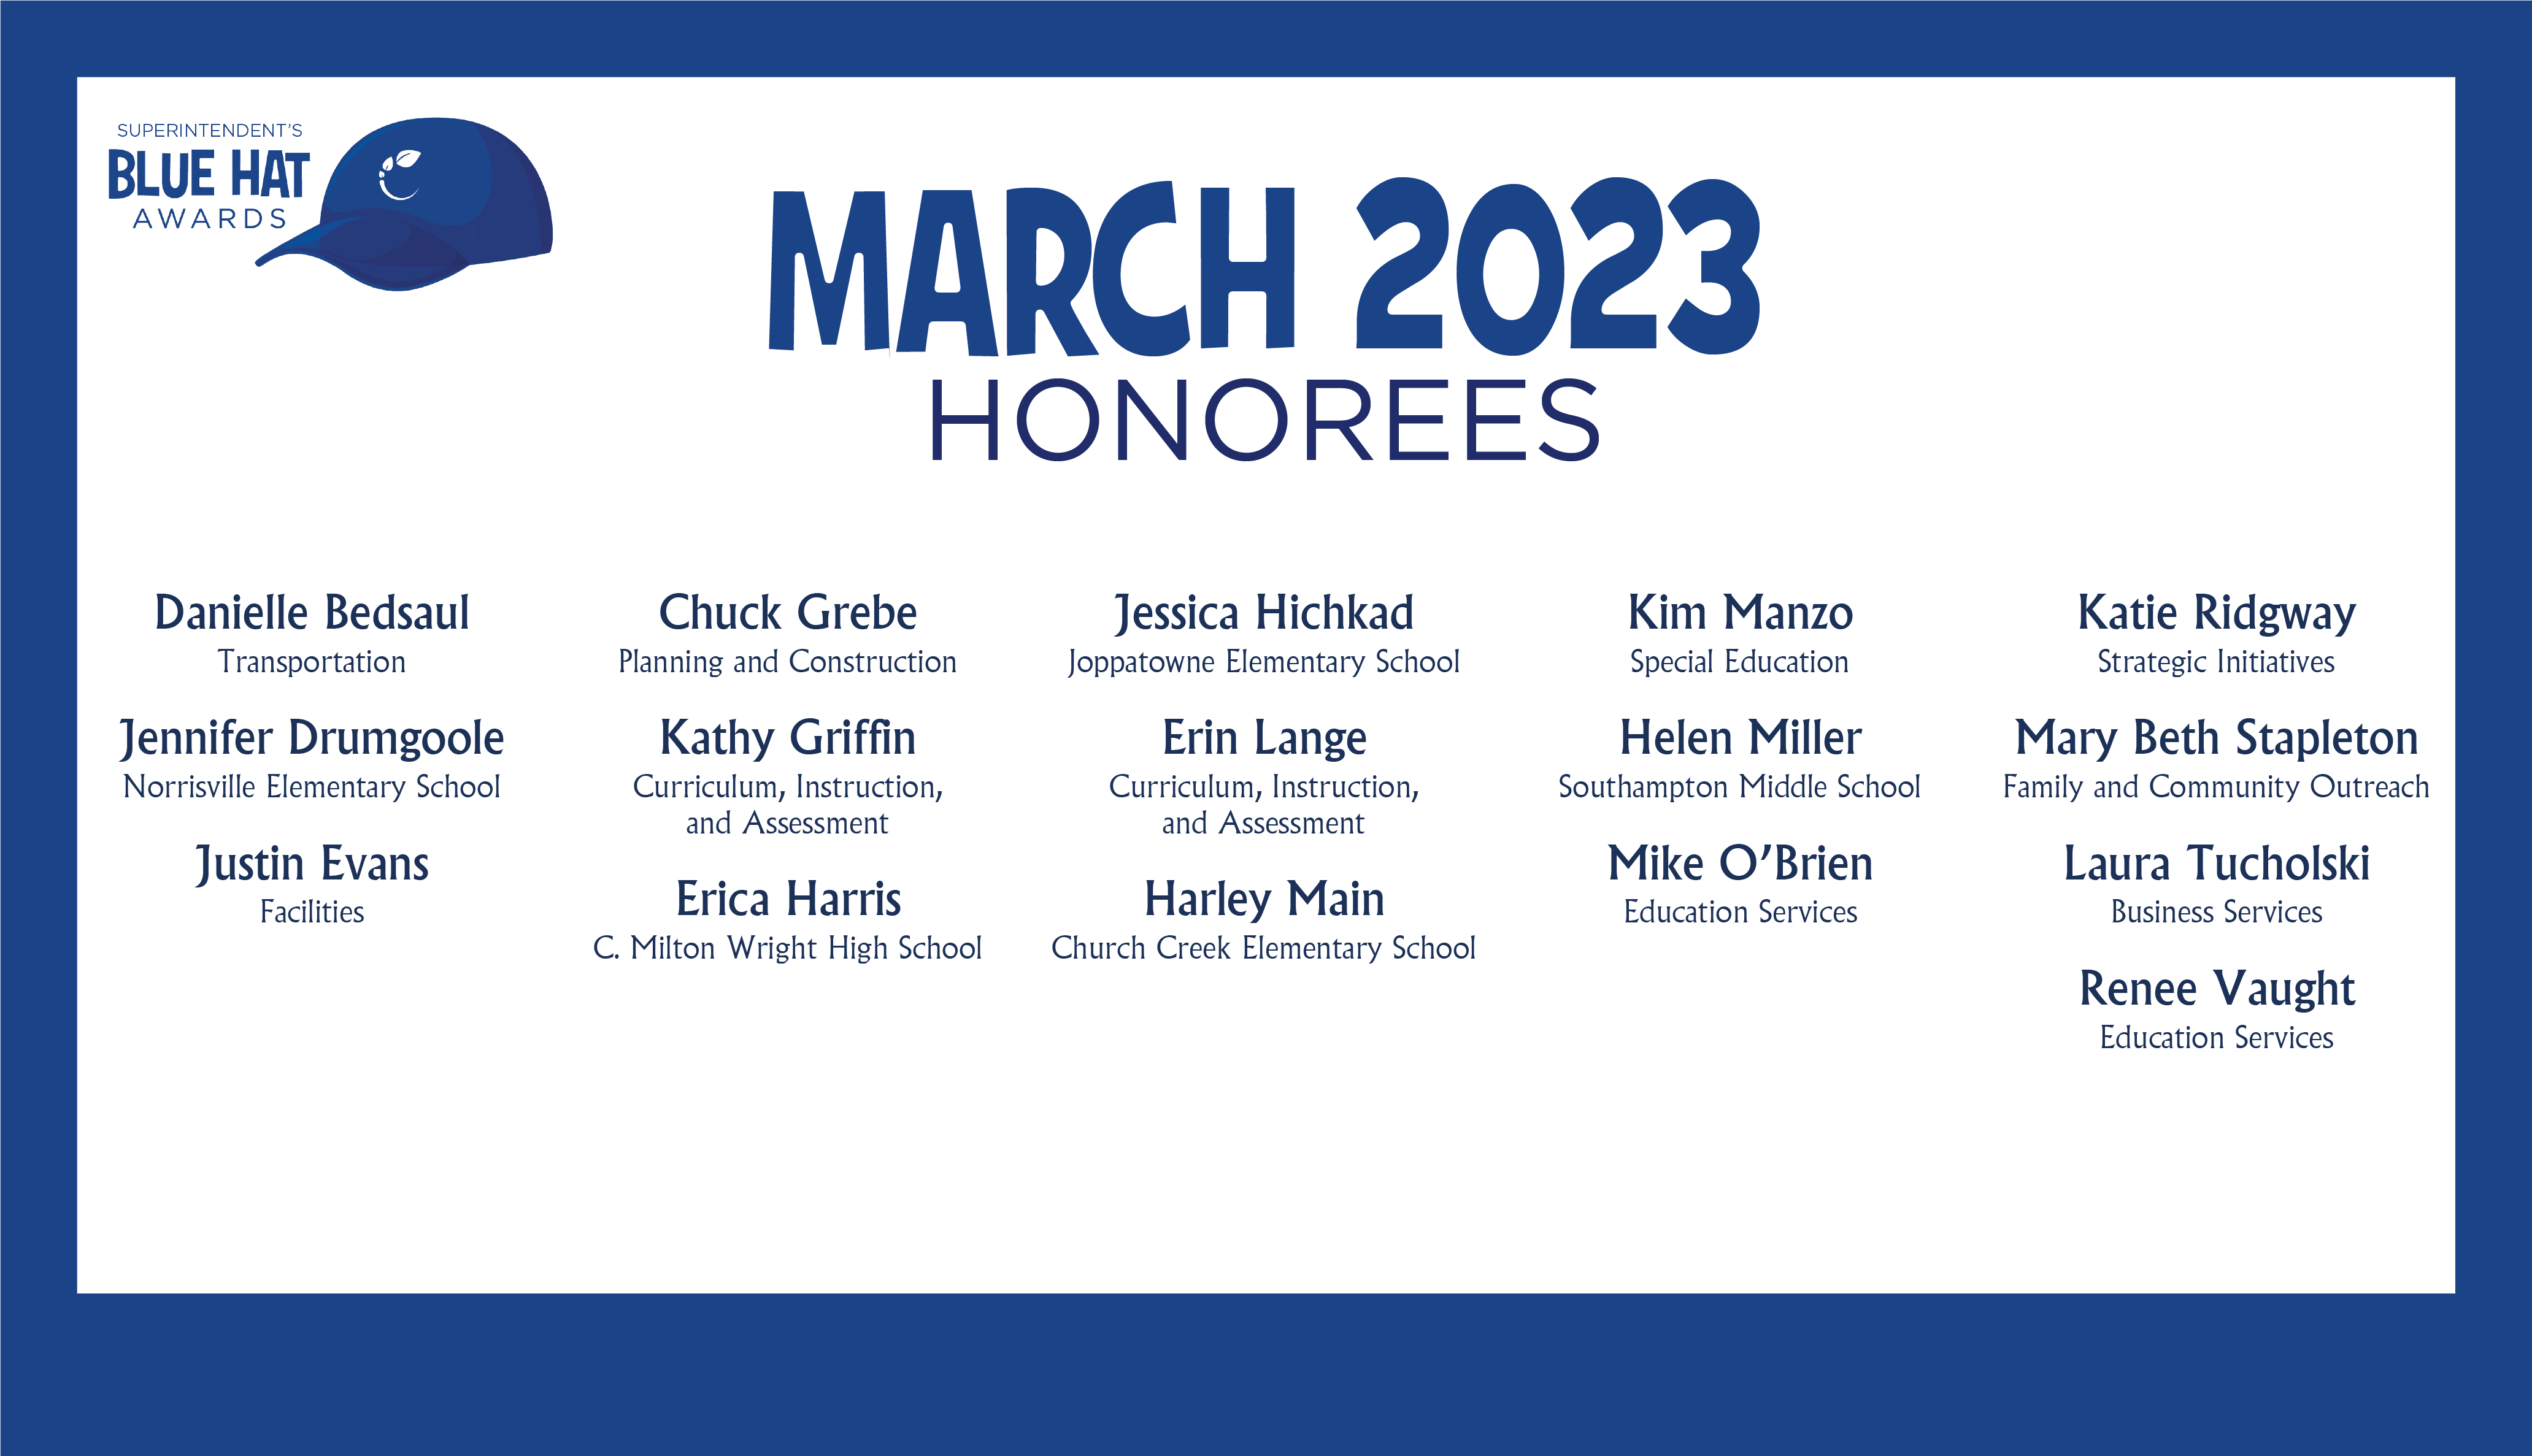 HCPS Blue Hat Honorees - March 2023